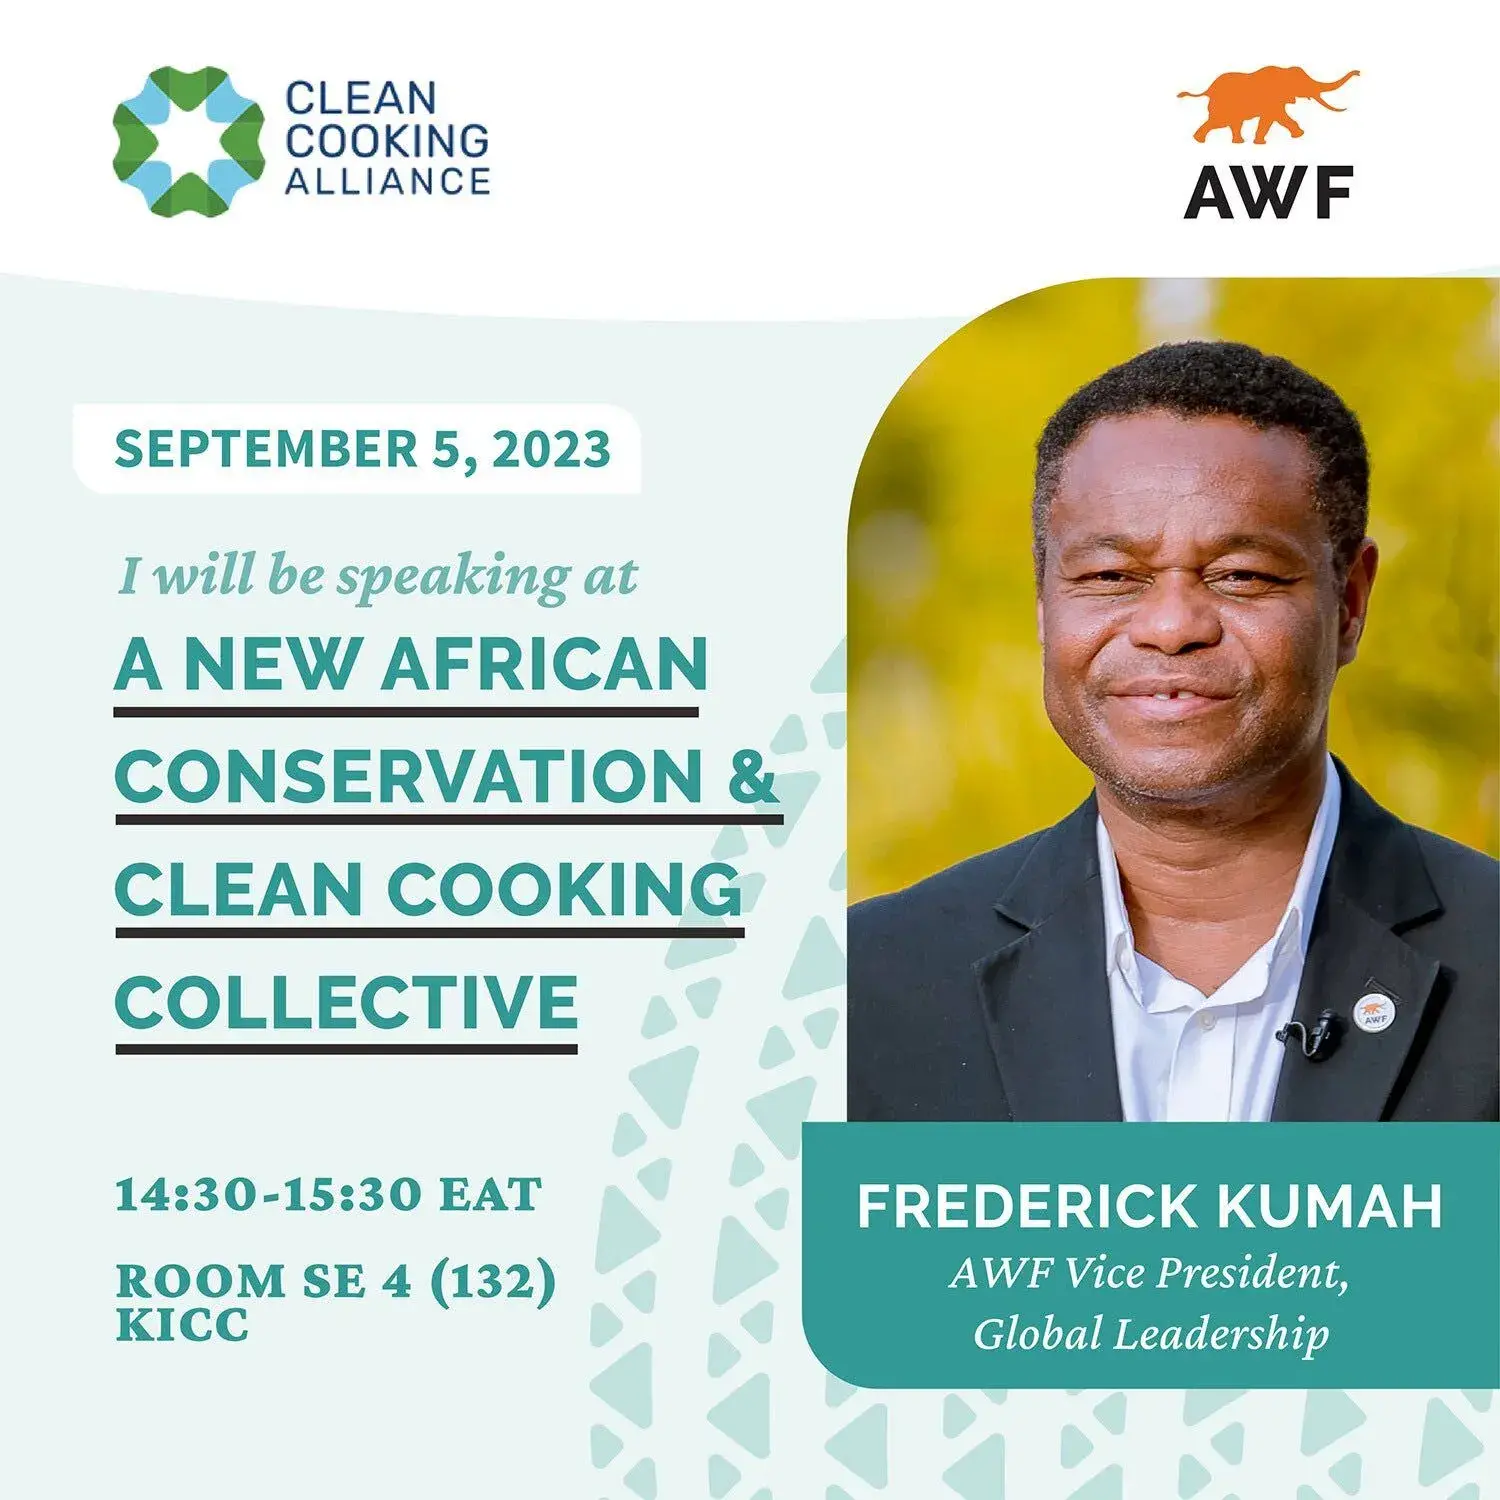 Frederick Kwame Kumah: I will be speaking at "A new African conservation & clean cooking collective" — 14:30-15:30 EAT, Room SE 4 (132) KICC